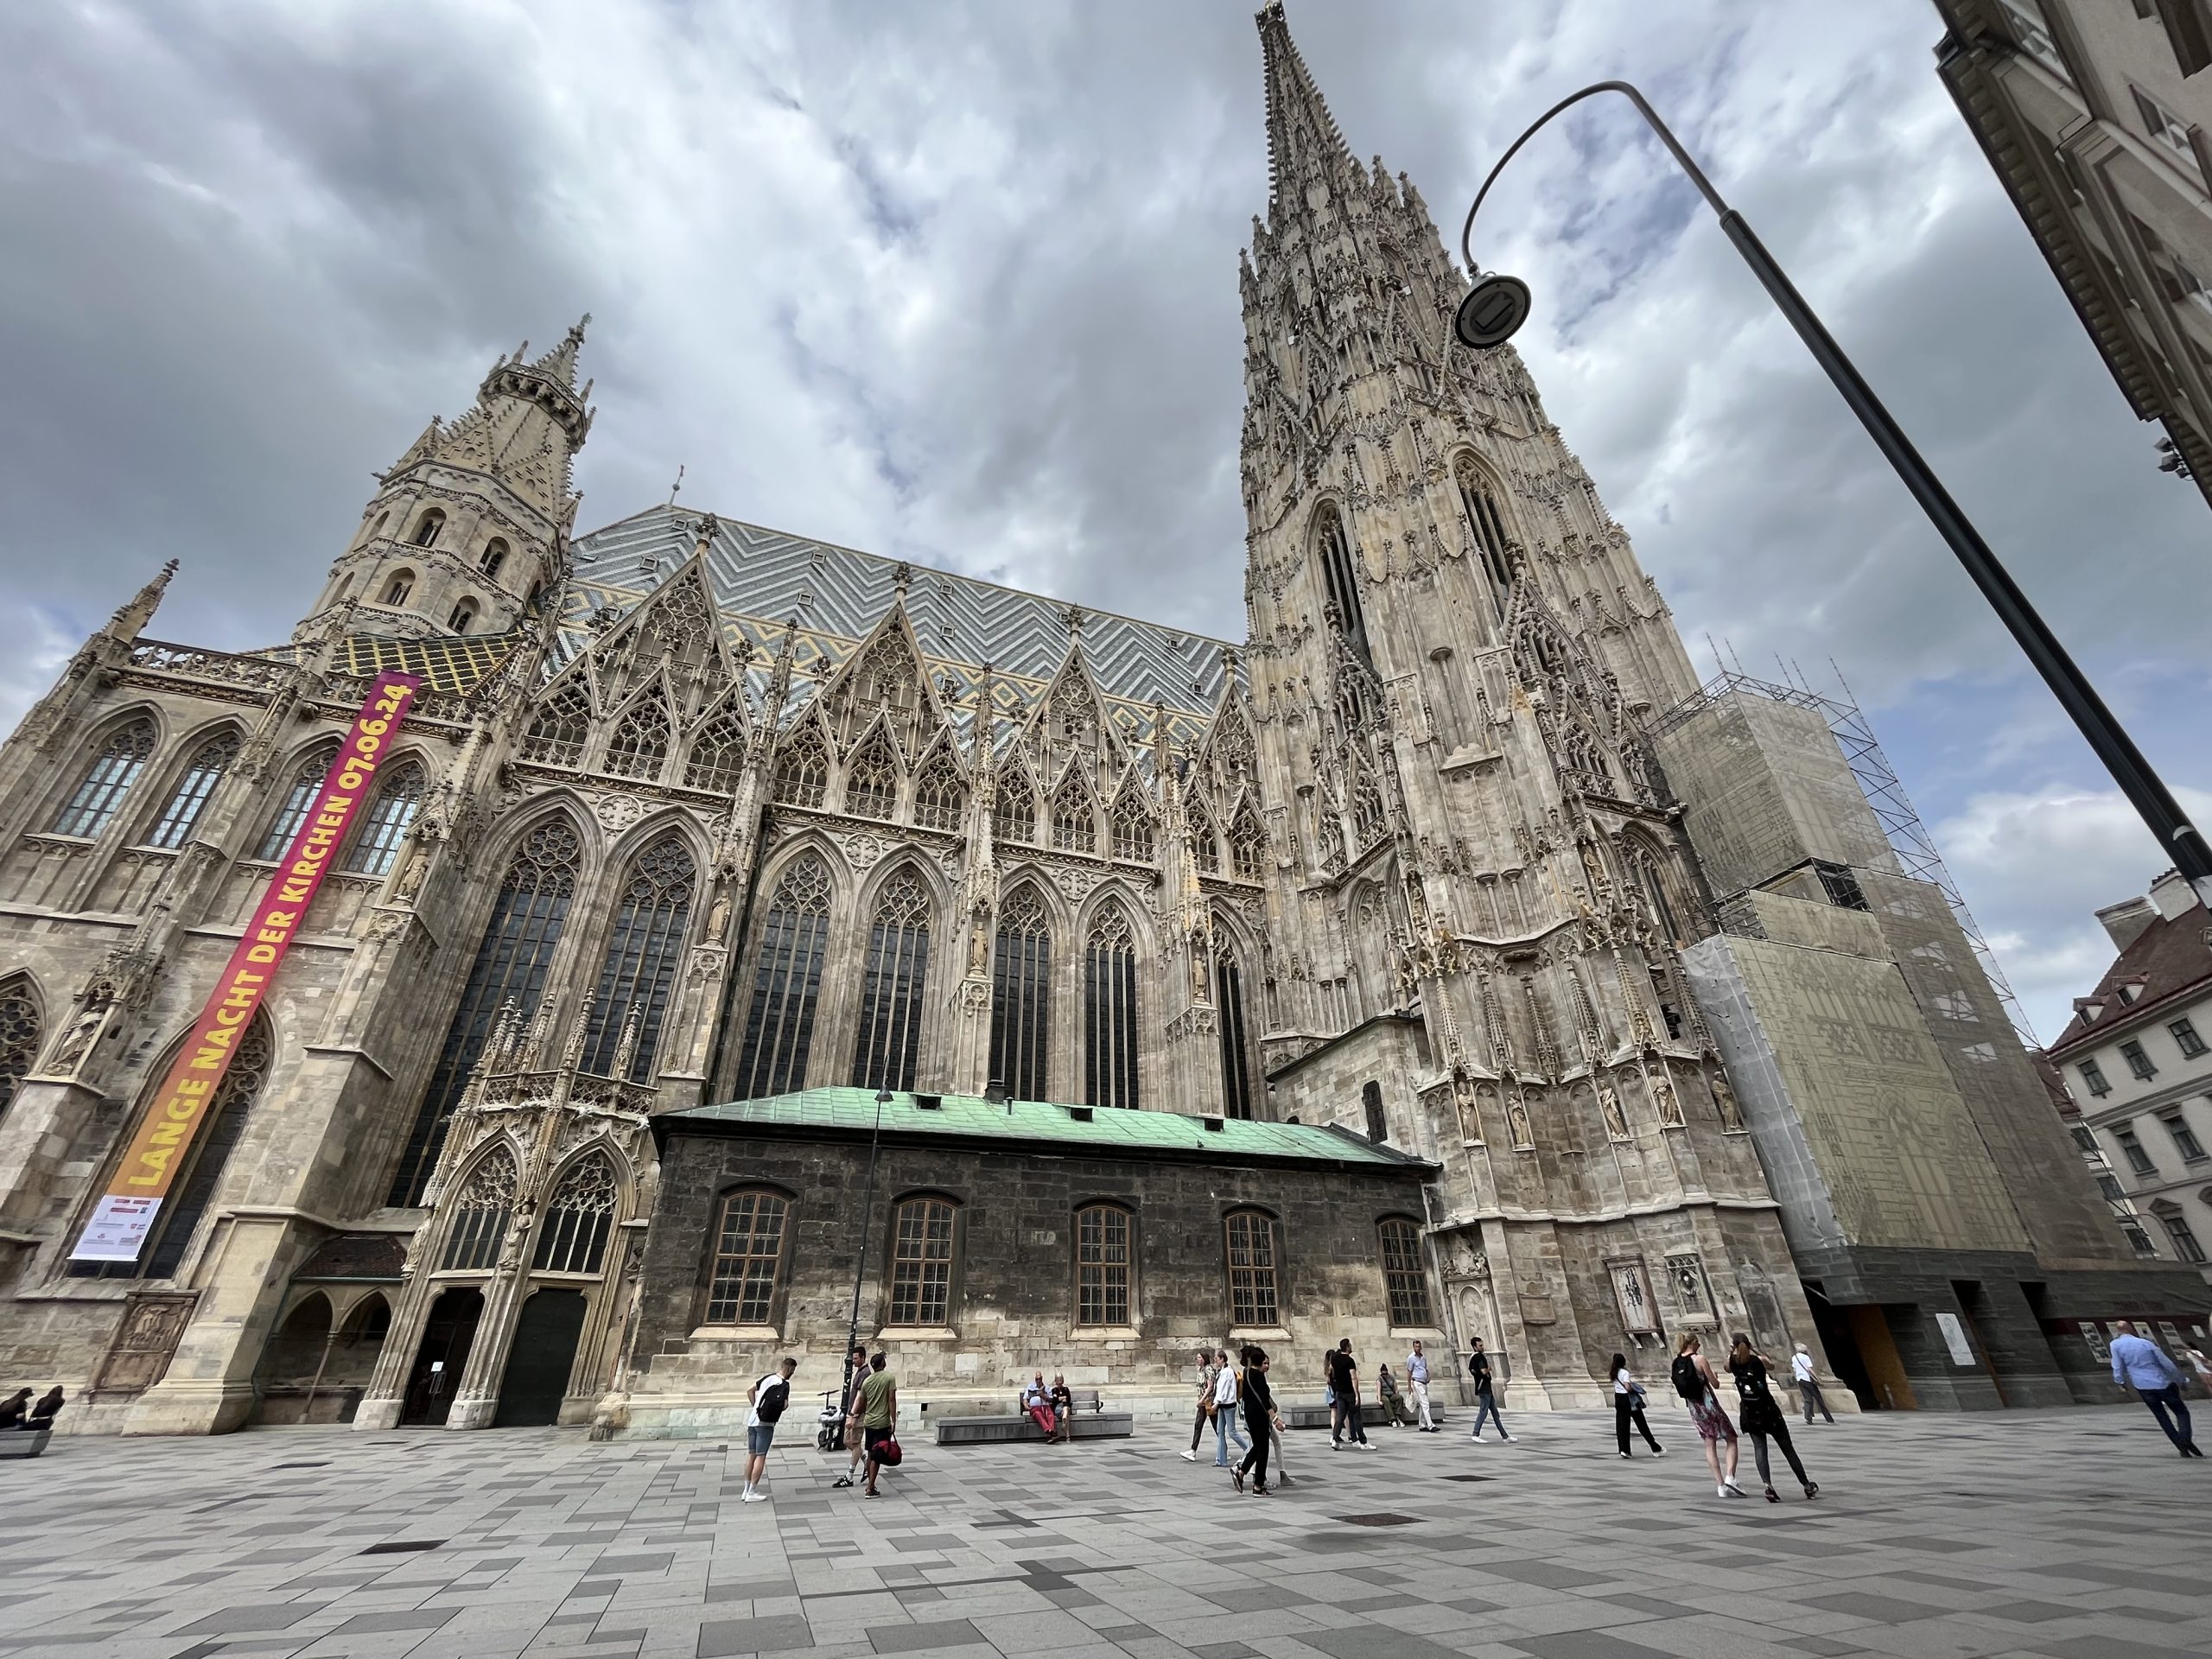 A photo of St. Stephen's Cathedral in Vienna